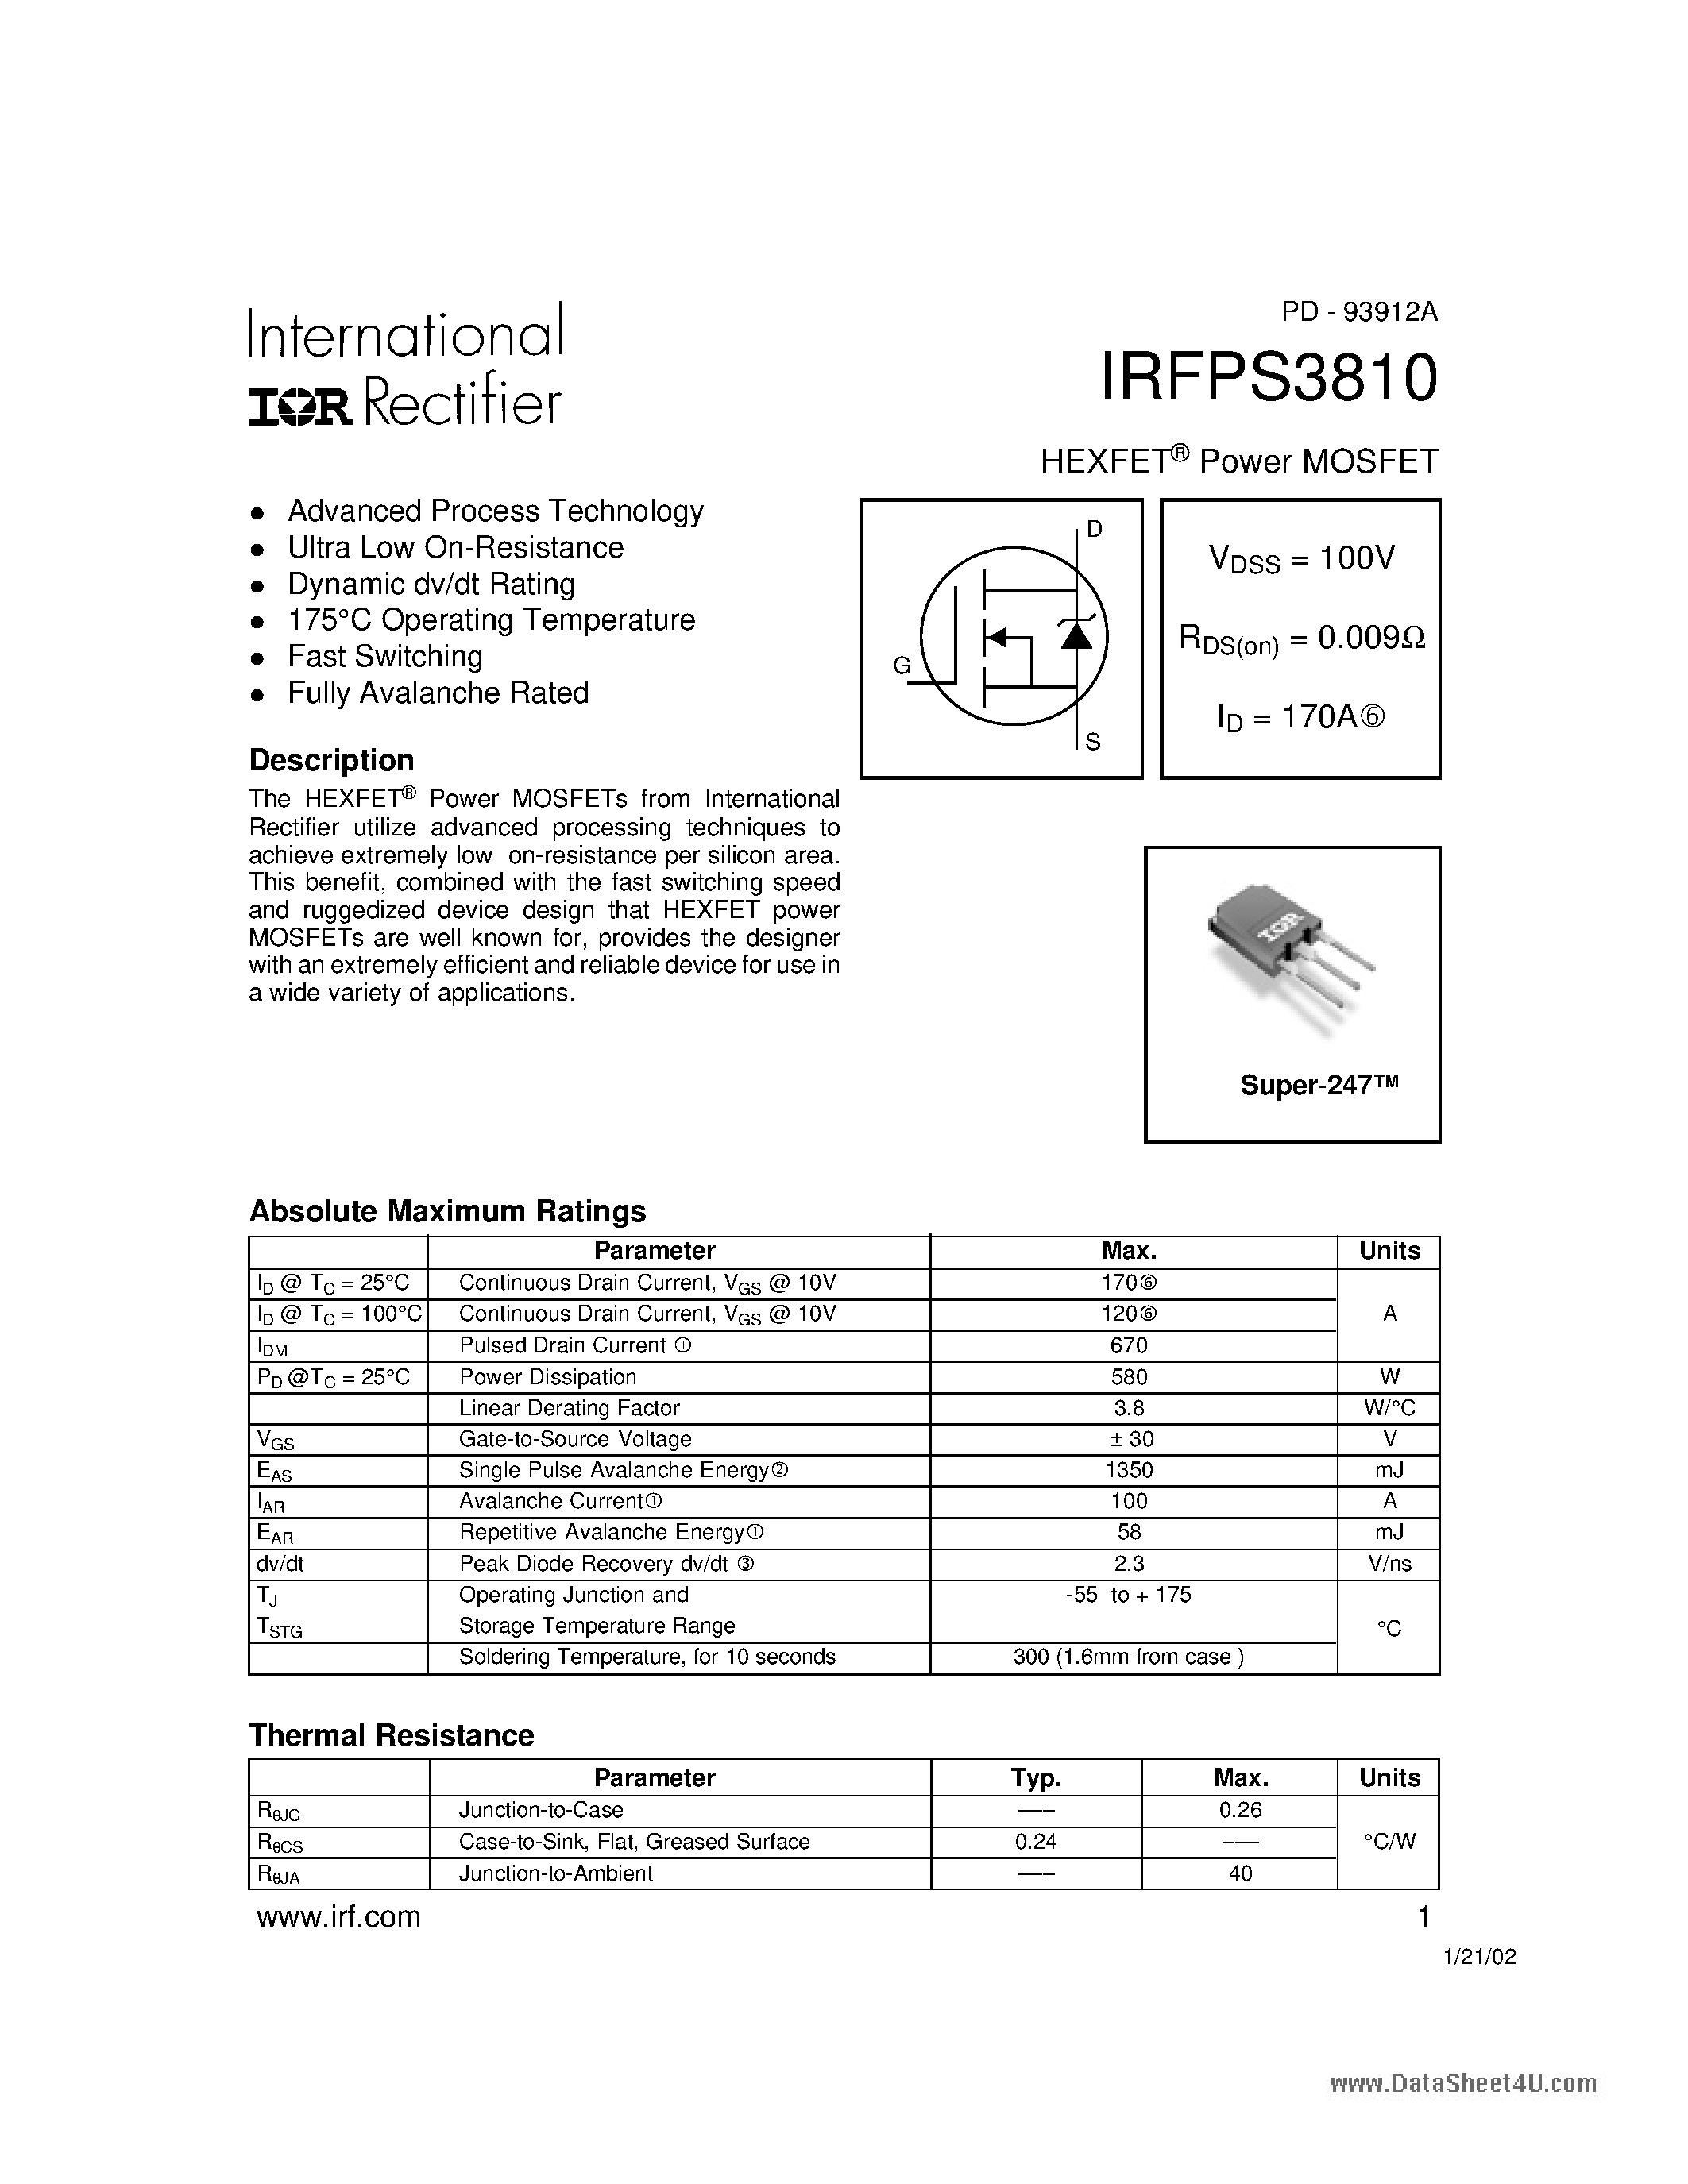 Datasheet IRFPS3810 - HEXFET Power MOSFET page 1